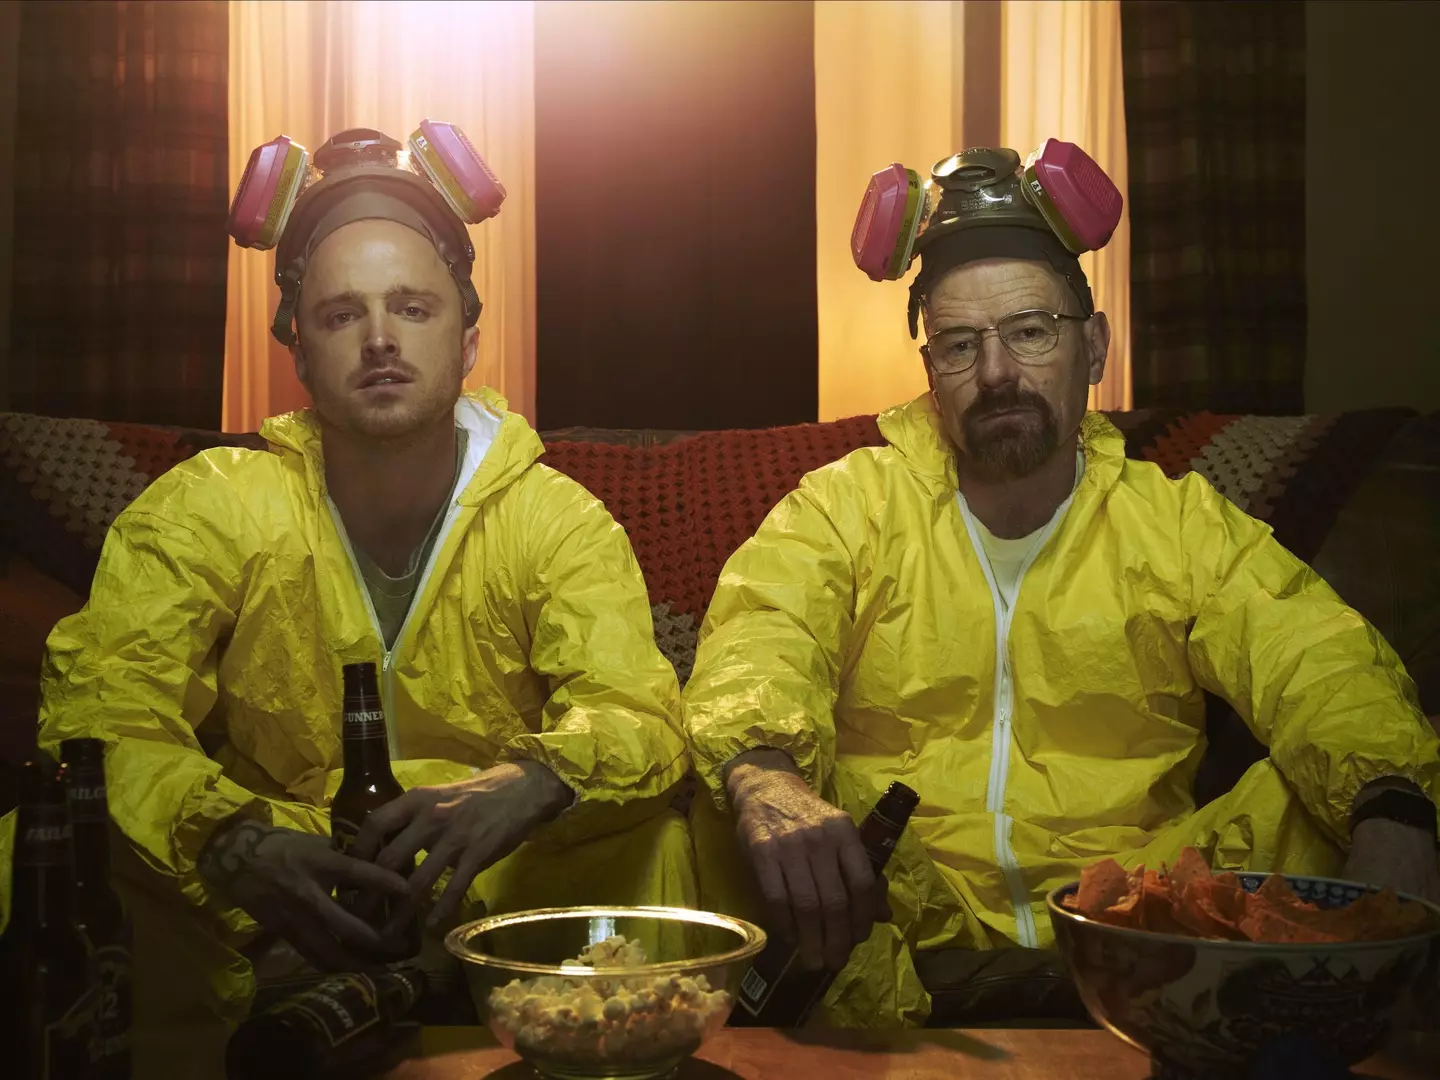 Breaking Bad finished almost a decade ago, but fans are still in shock.